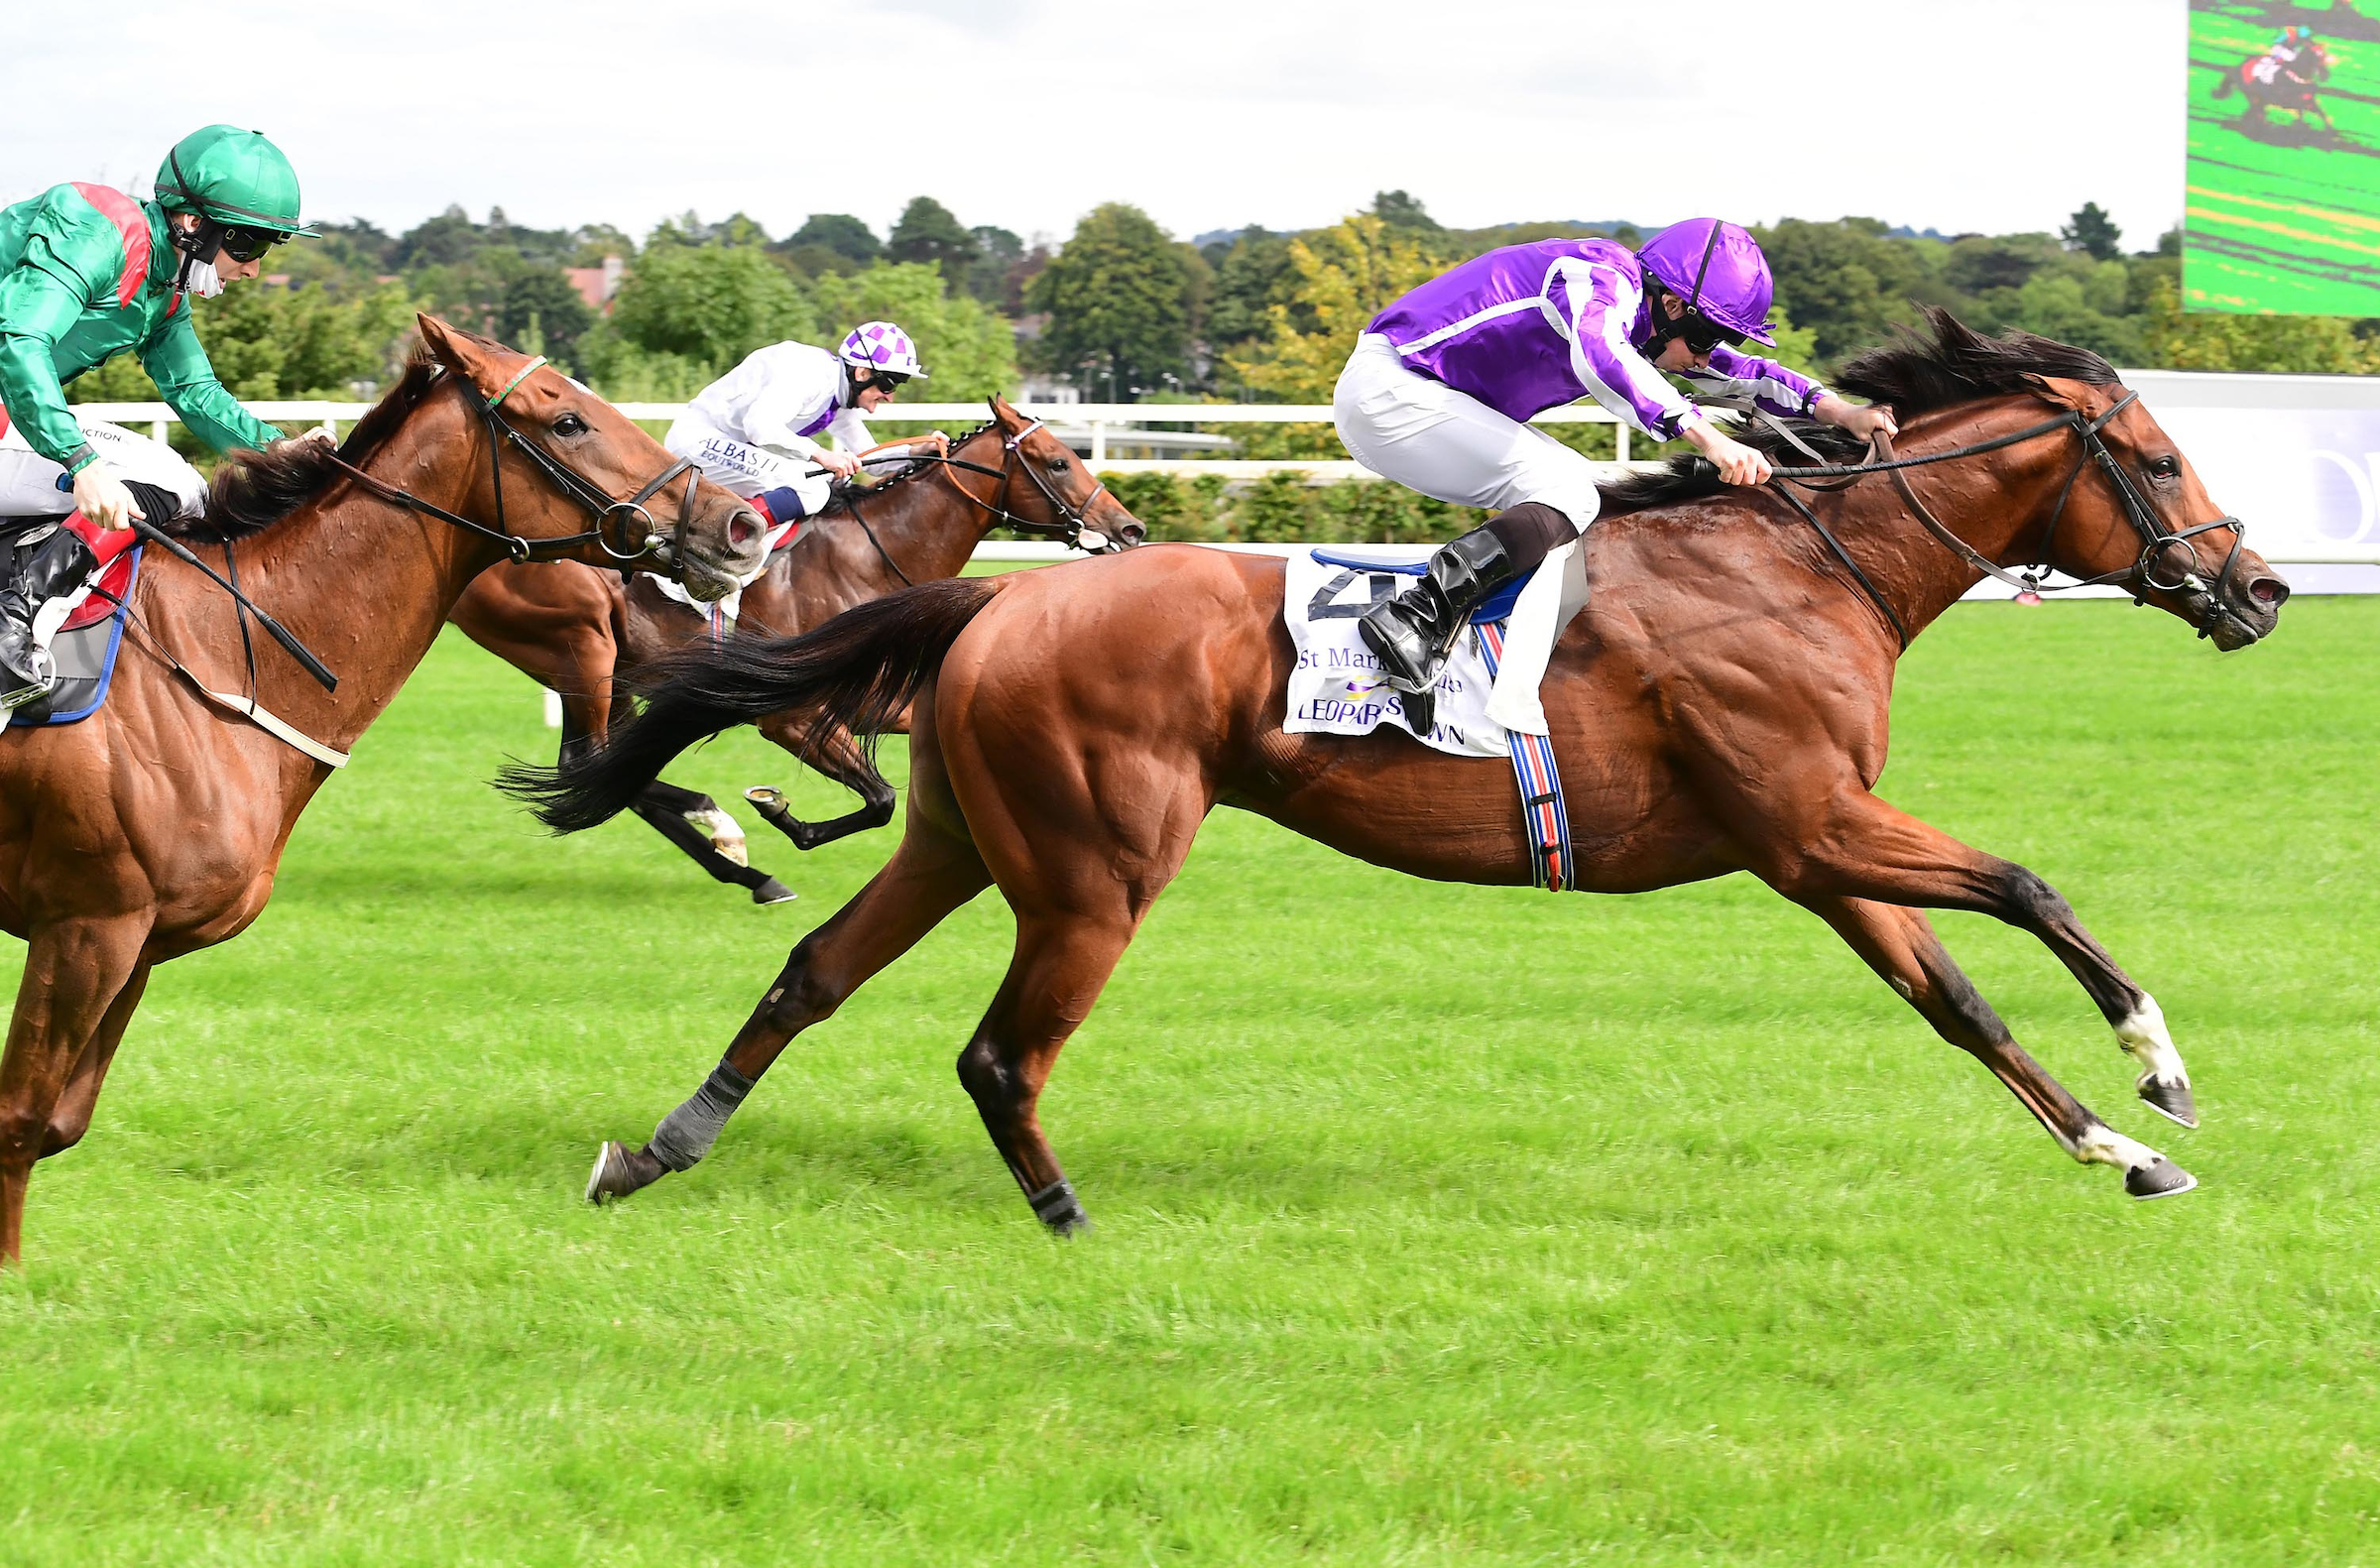 Turf Horse of the Year St Mark’s Basilica pictured winning the Irish Champion Stakes from Tarnawa (left) and Poetic Flare at Leopardstown in September. Photo: Healy/focusonracing.com